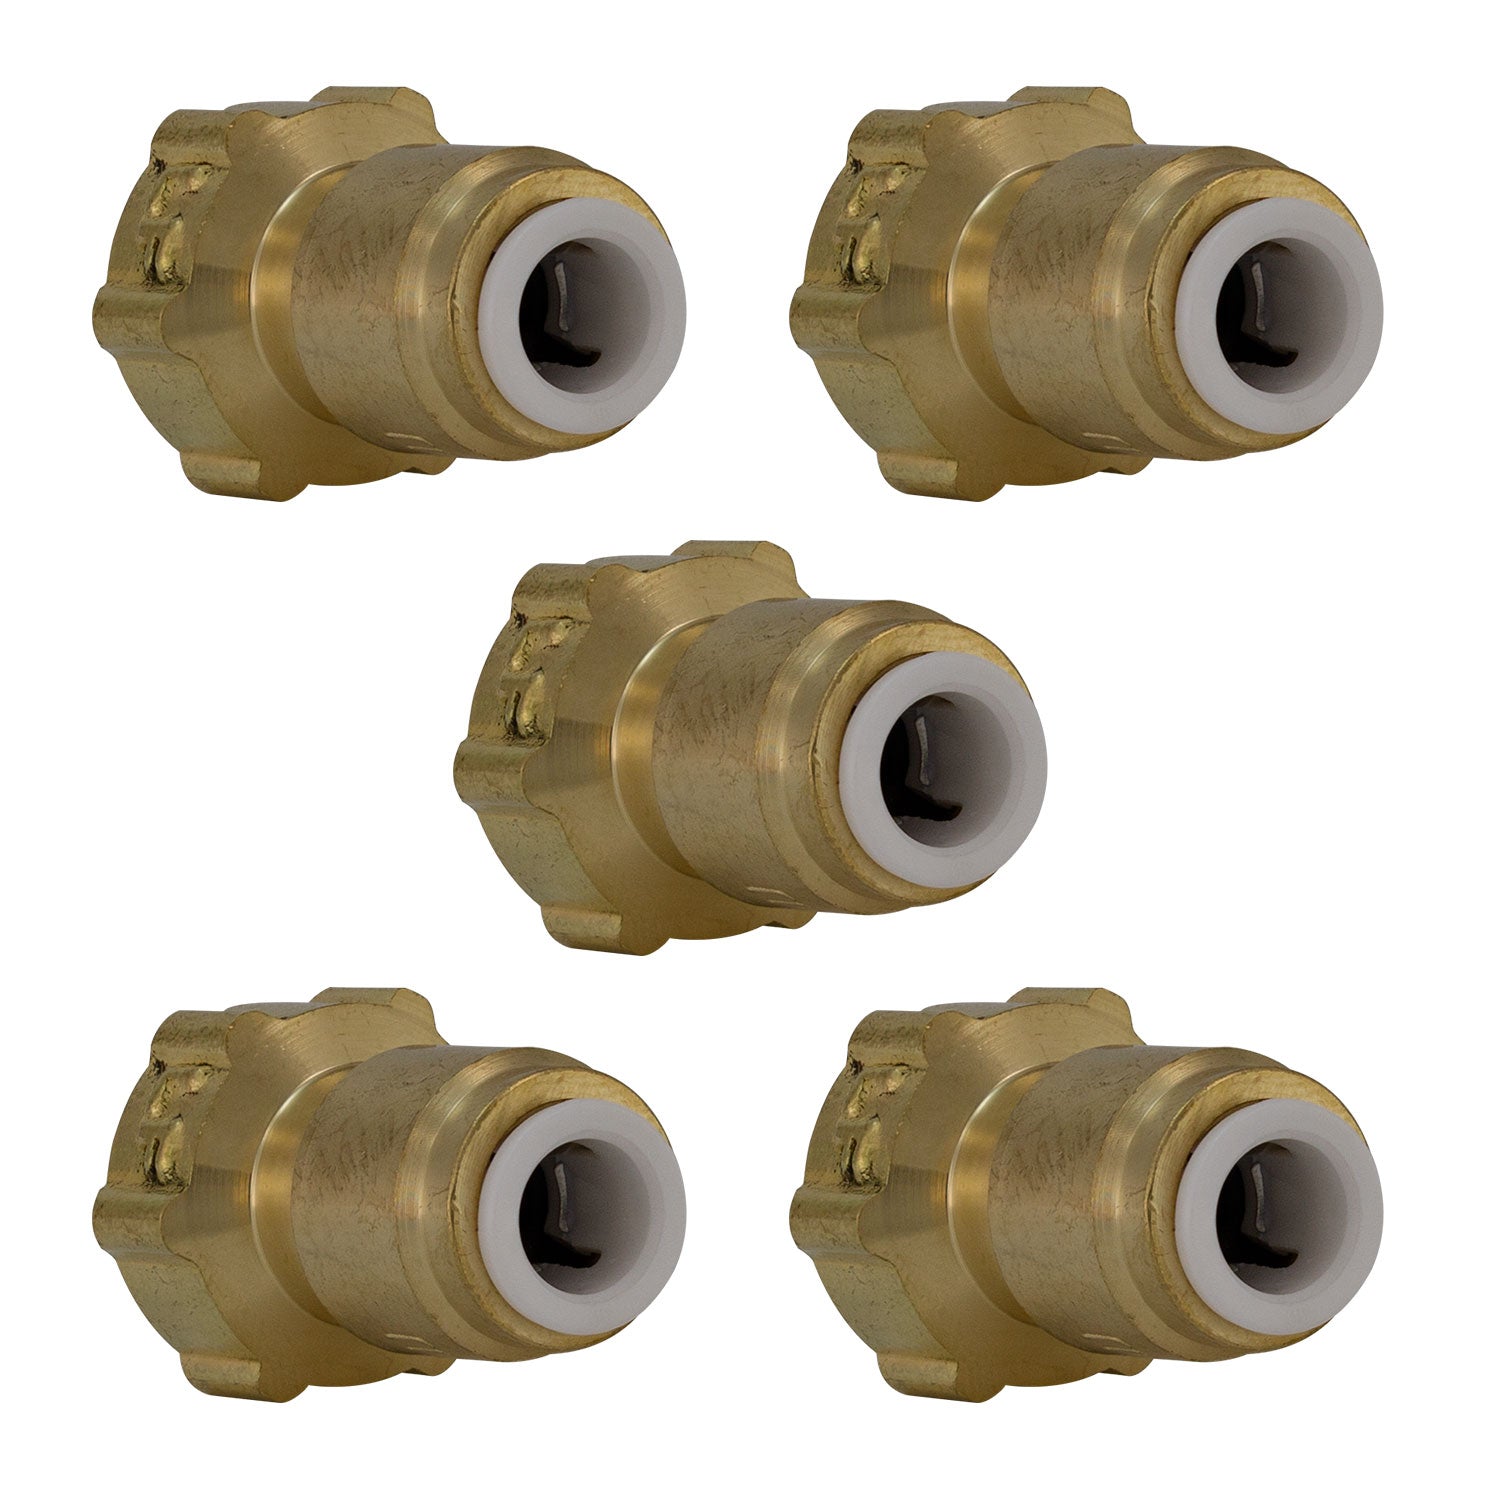 Metpure Quick Connect Female Brass Reducing Adapter - 1/4" OD Quick Connect x 3/8" COMP Female Threaded Compression (5 Pack)